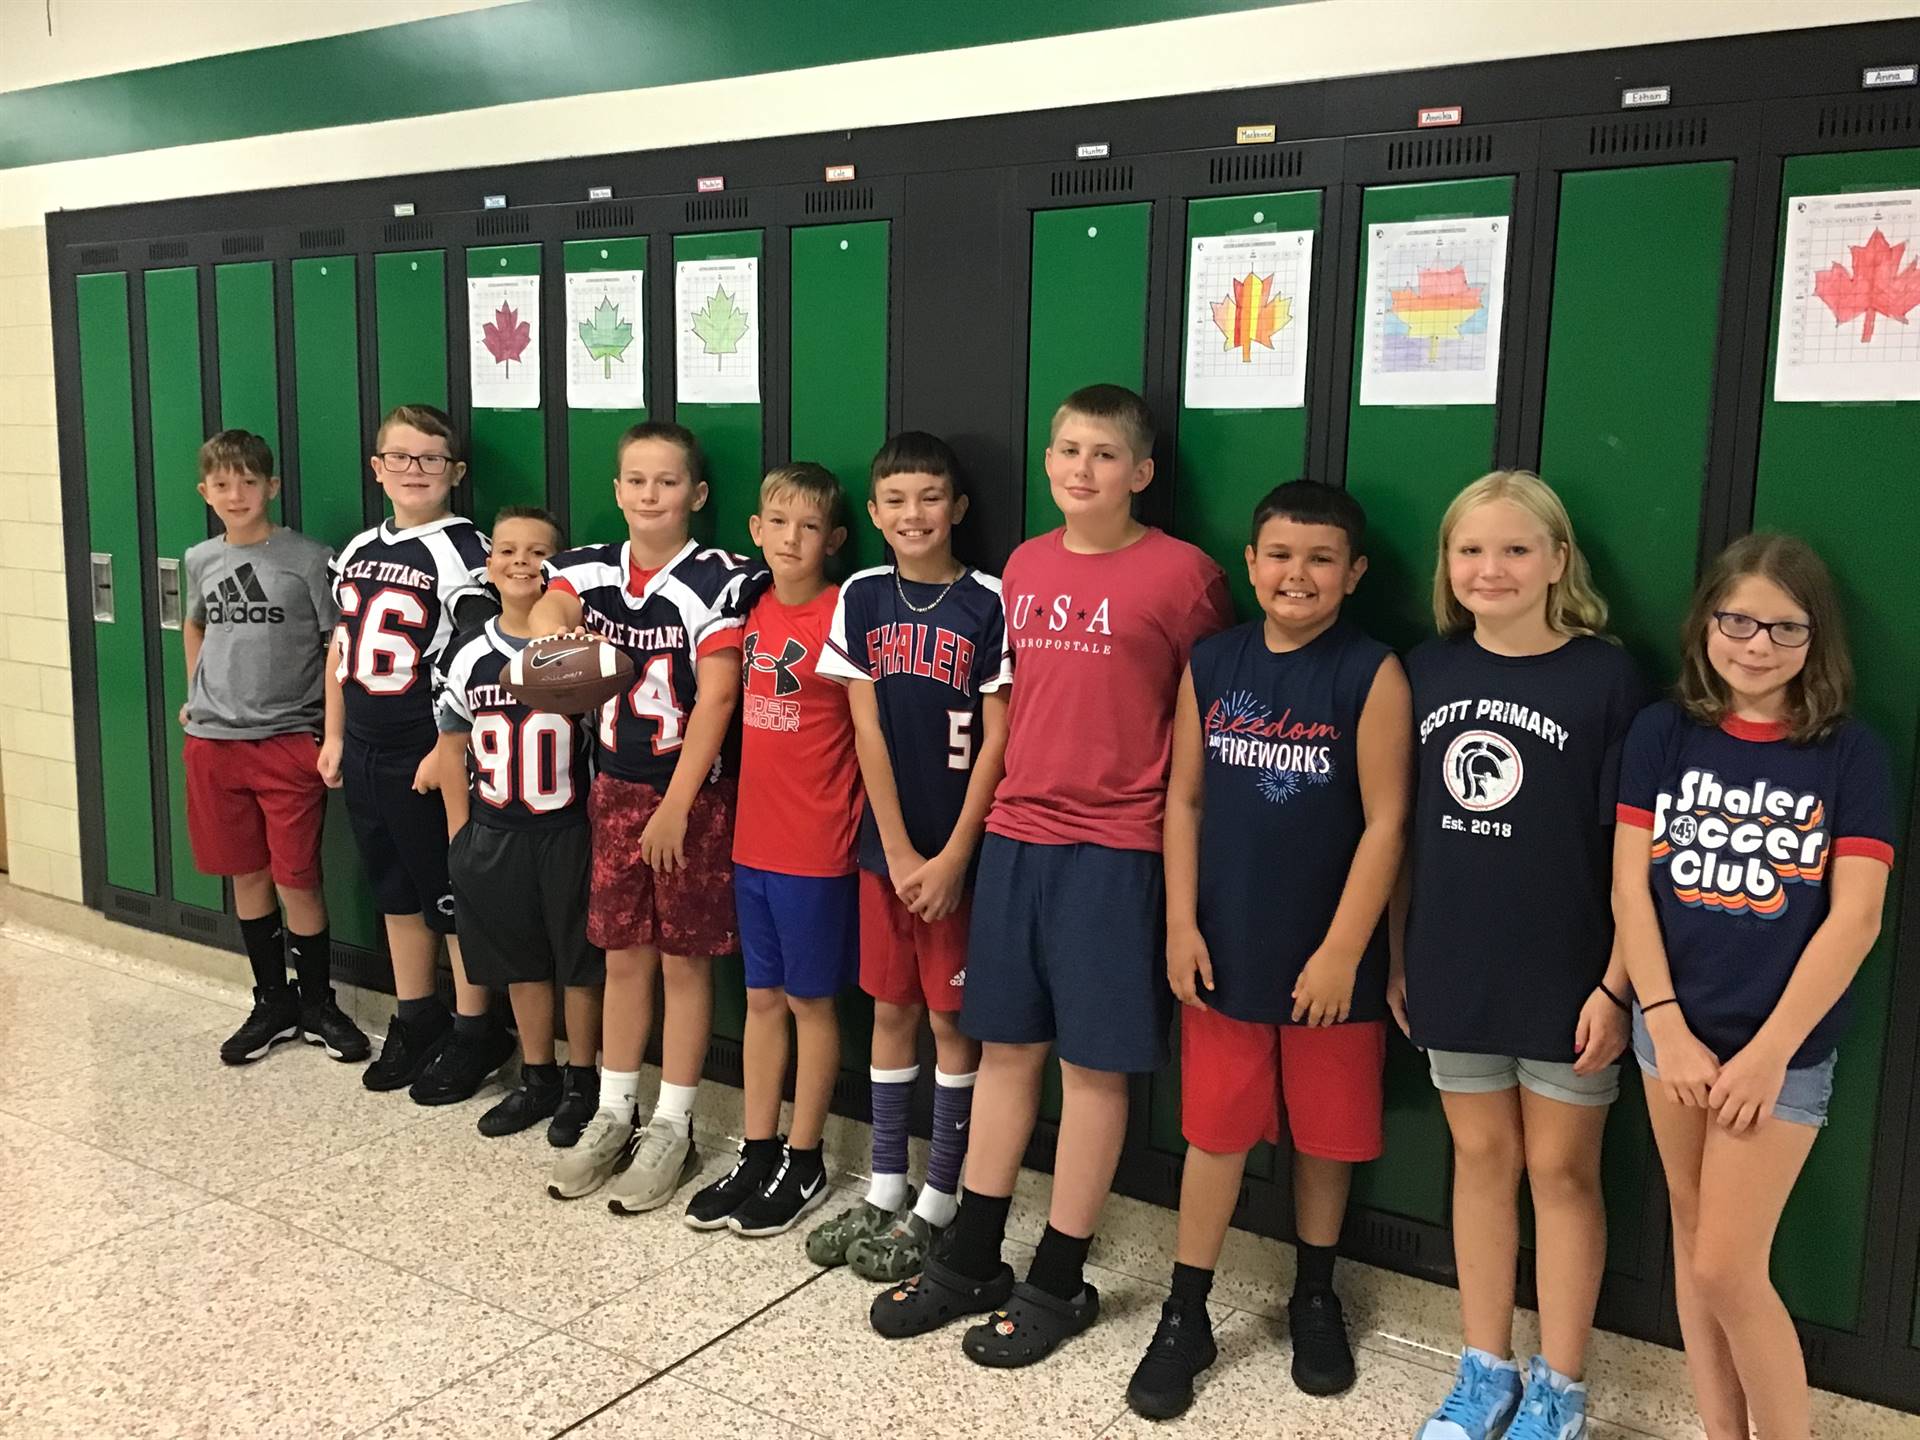 Students wearing red, white and blue